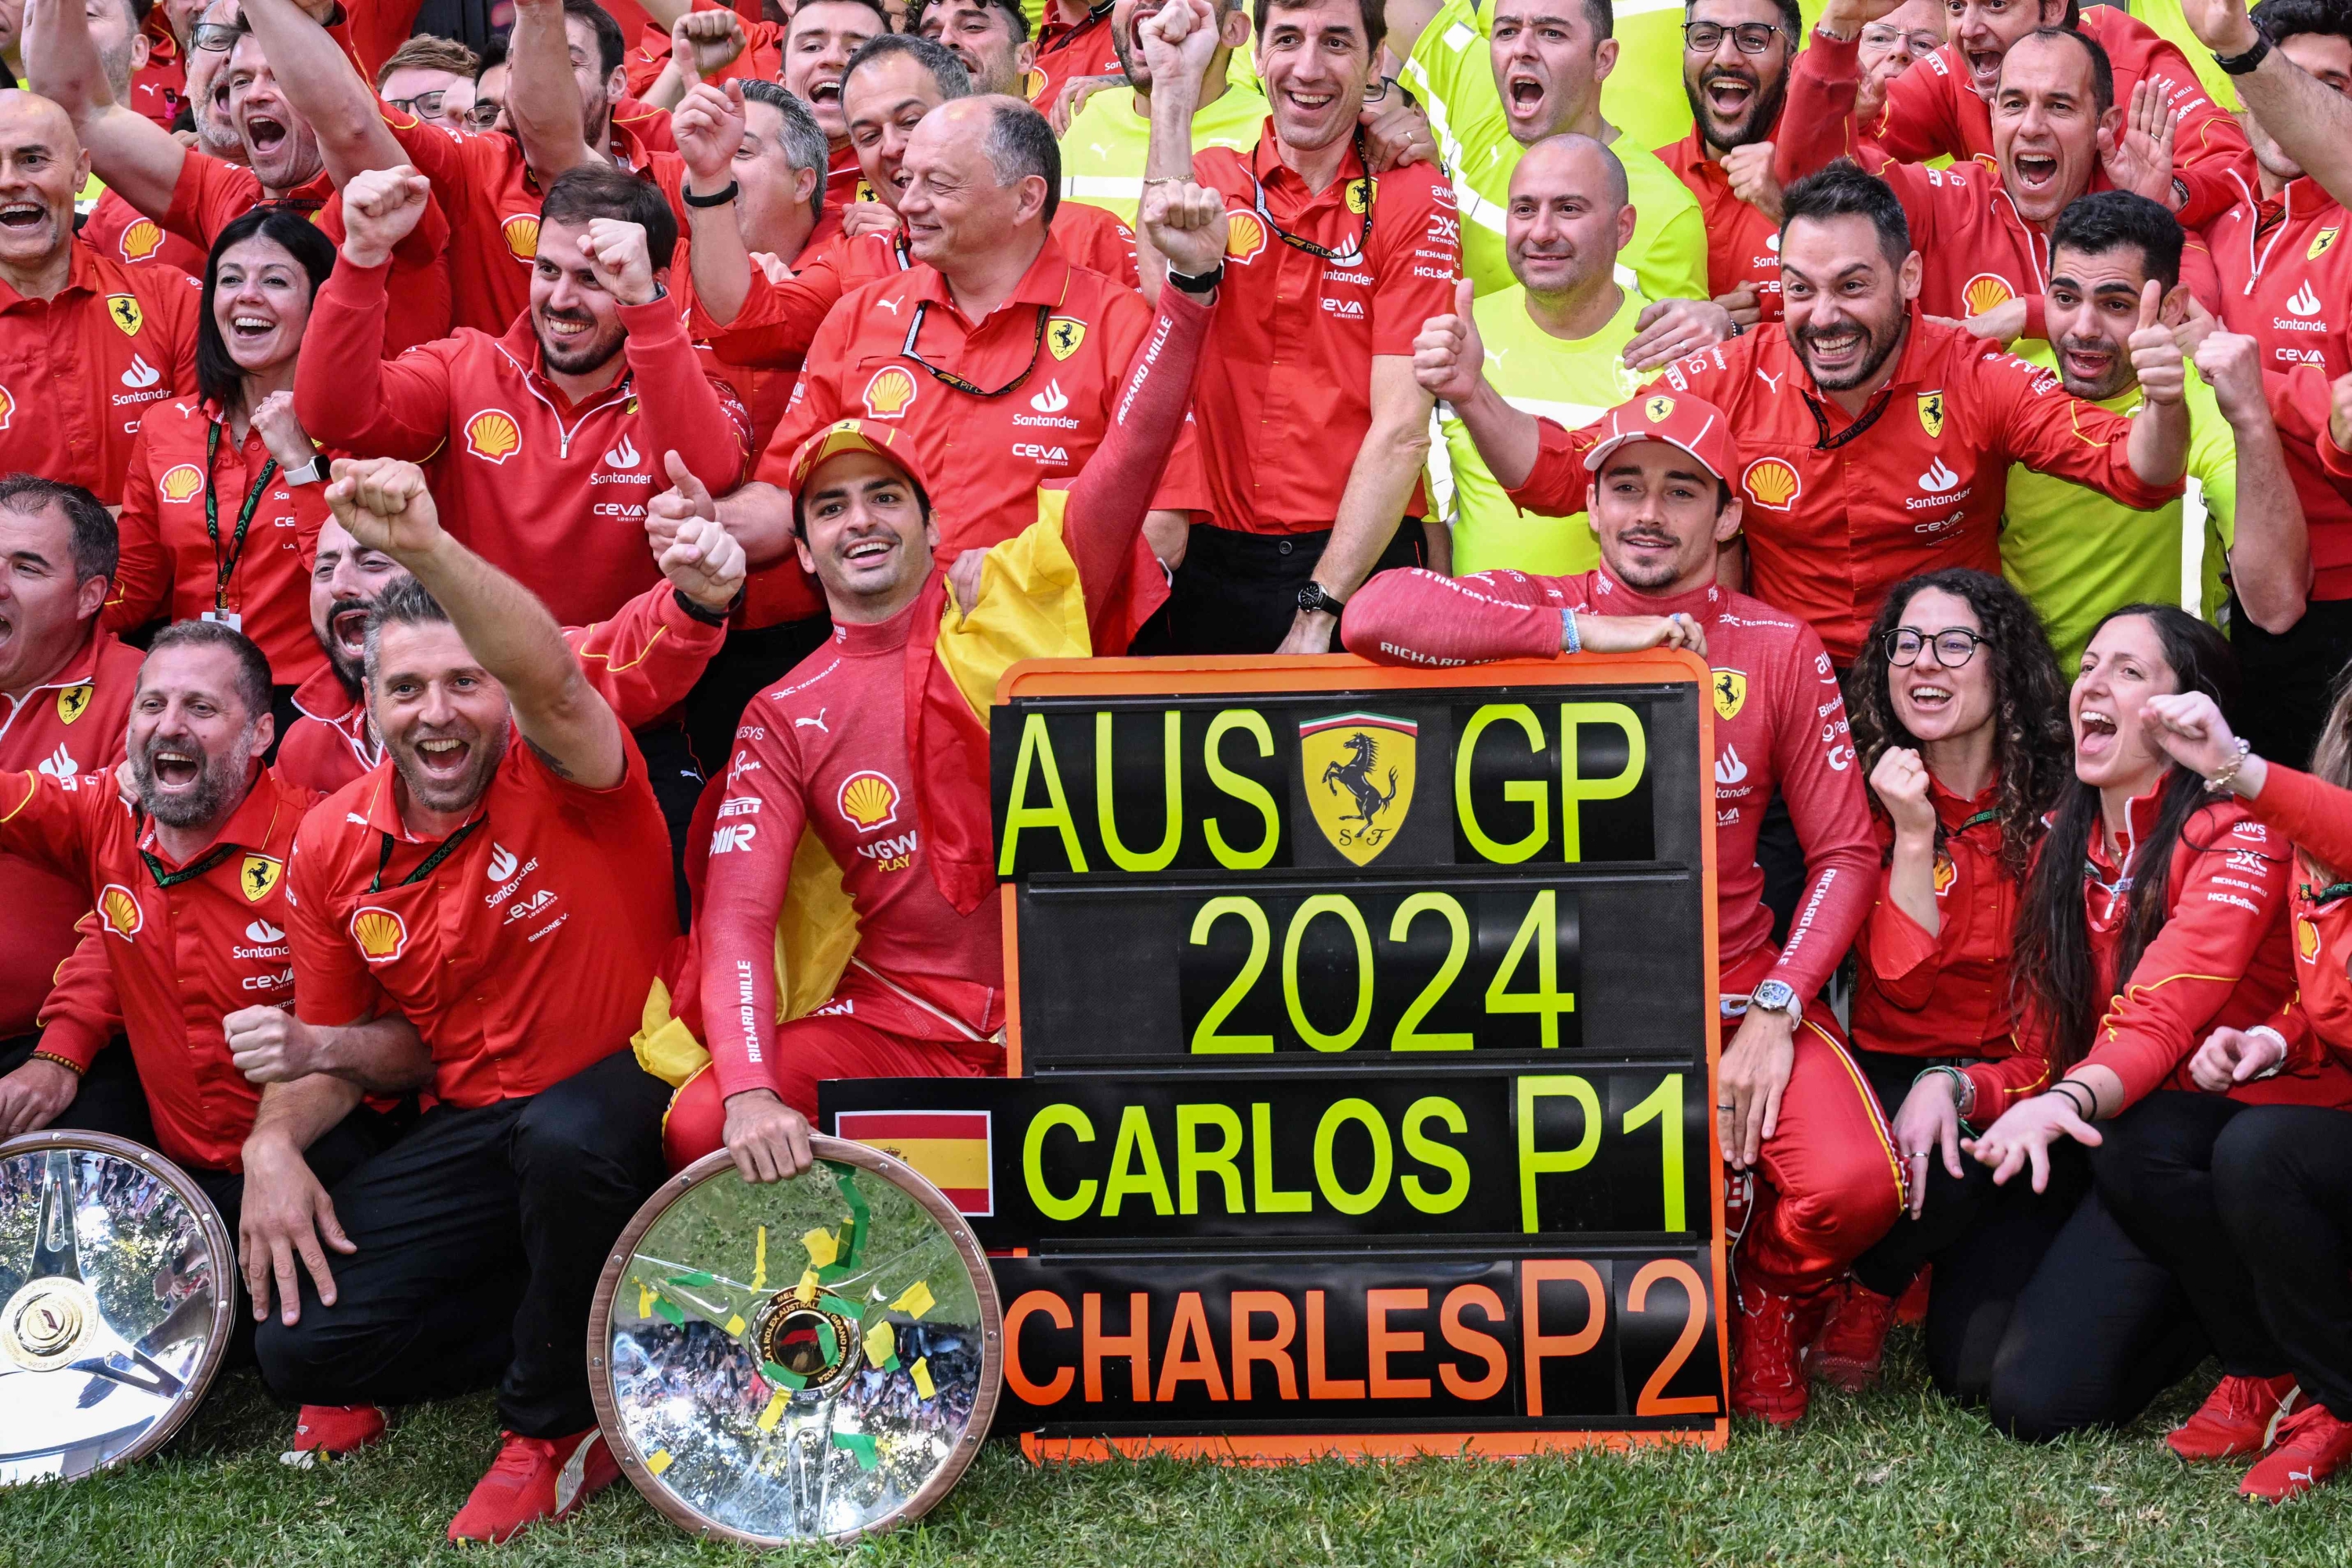 TOPSHOT - Winner Ferrari's Spanish driver Carlos Sainz Jr (front centre L) and second-placed Ferrari's Monegasque driver Charles Leclerc (front centre R) celebrate with their team after the Australian Formula One Grand Prix at Albert Park Circuit in Melbourne on March 24, 2024. (Photo by WILLIAM WEST / AFP) / -- IMAGE RESTRICTED TO EDITORIAL USE - STRICTLY NO COMMERCIAL USE --